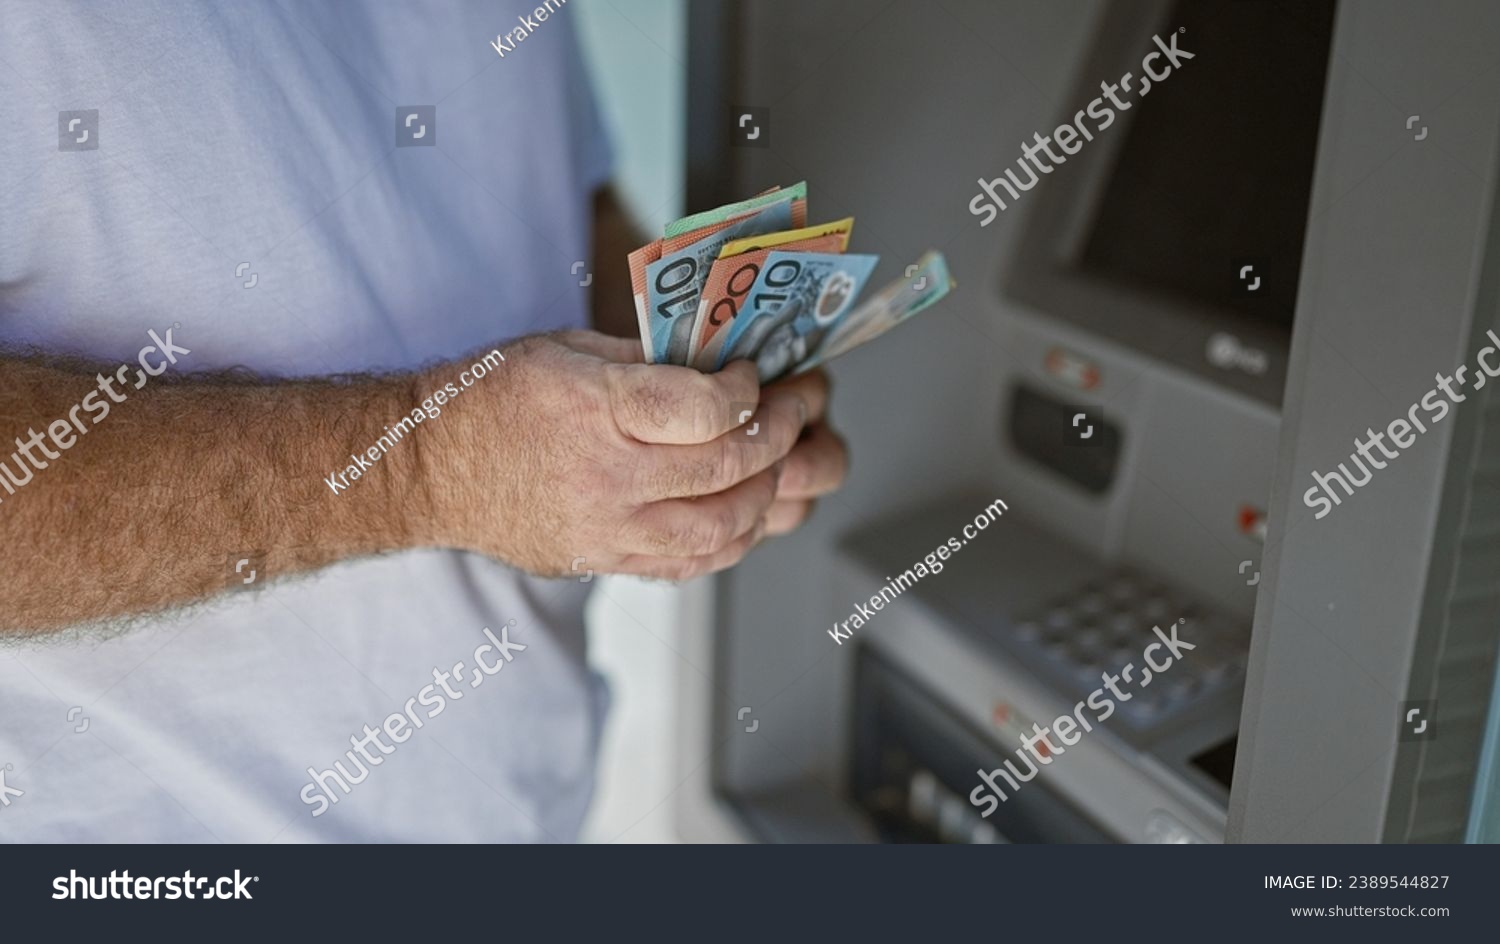 Handsome middle-aged caucasian man outside on urban street, captivating portrait of him holding wallet counting australian cash dollars at atm machine, engaging in banking transaction. #2389544827